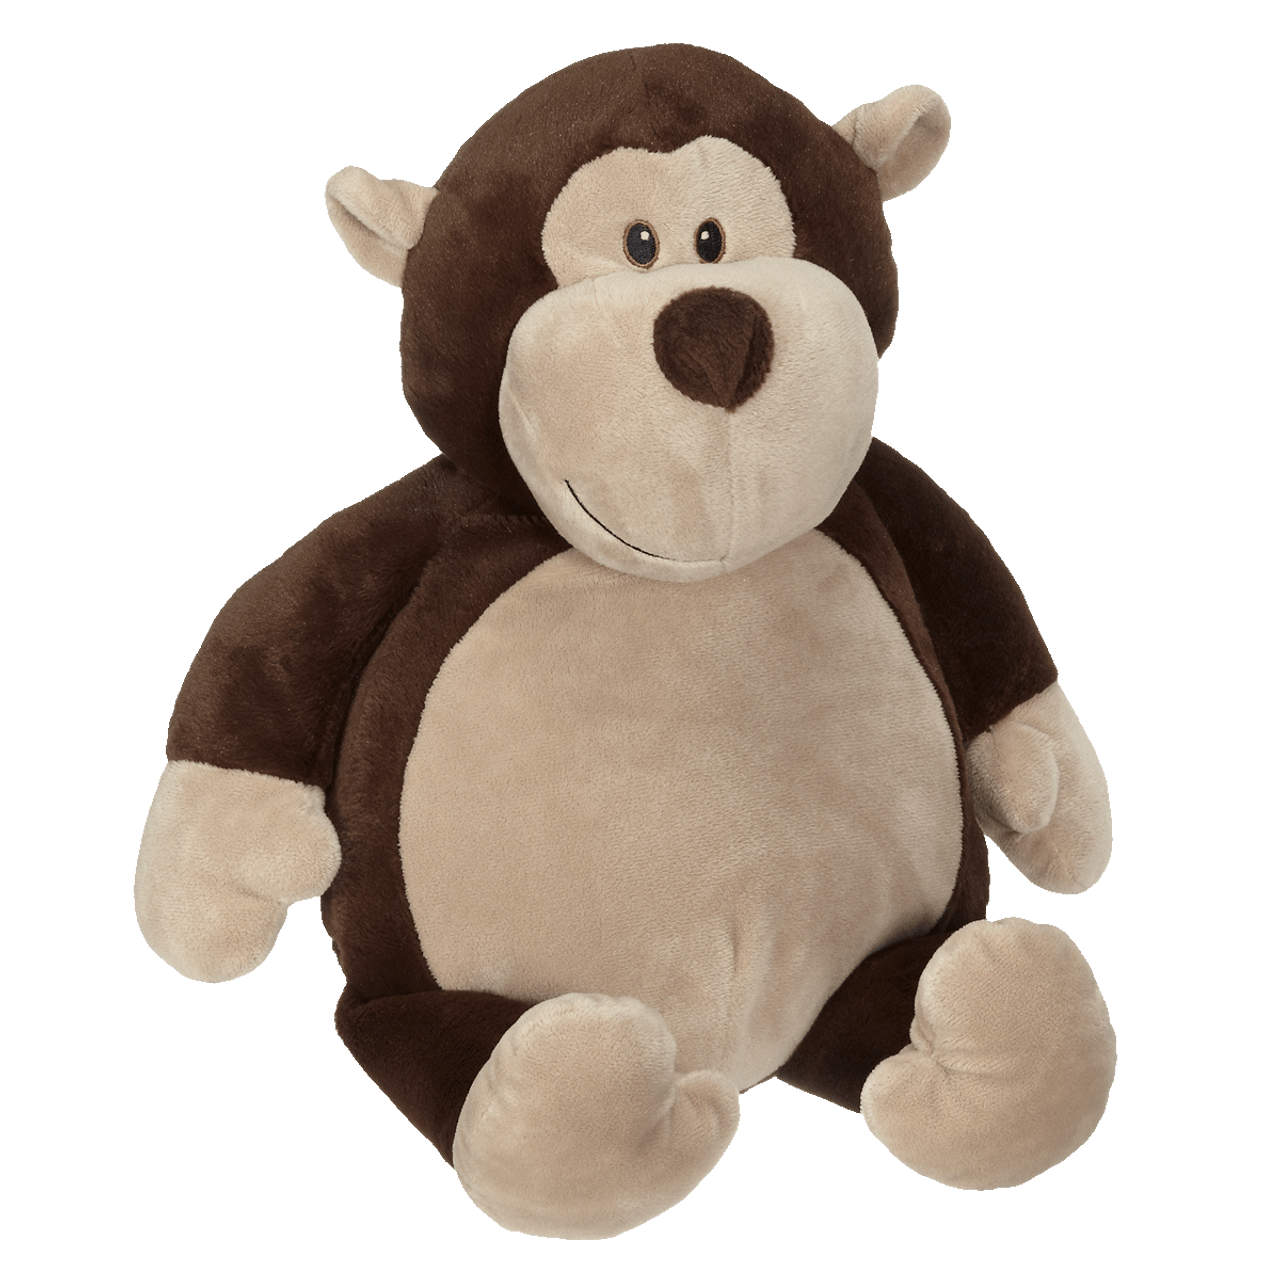 personalized embroidered stuffed animals